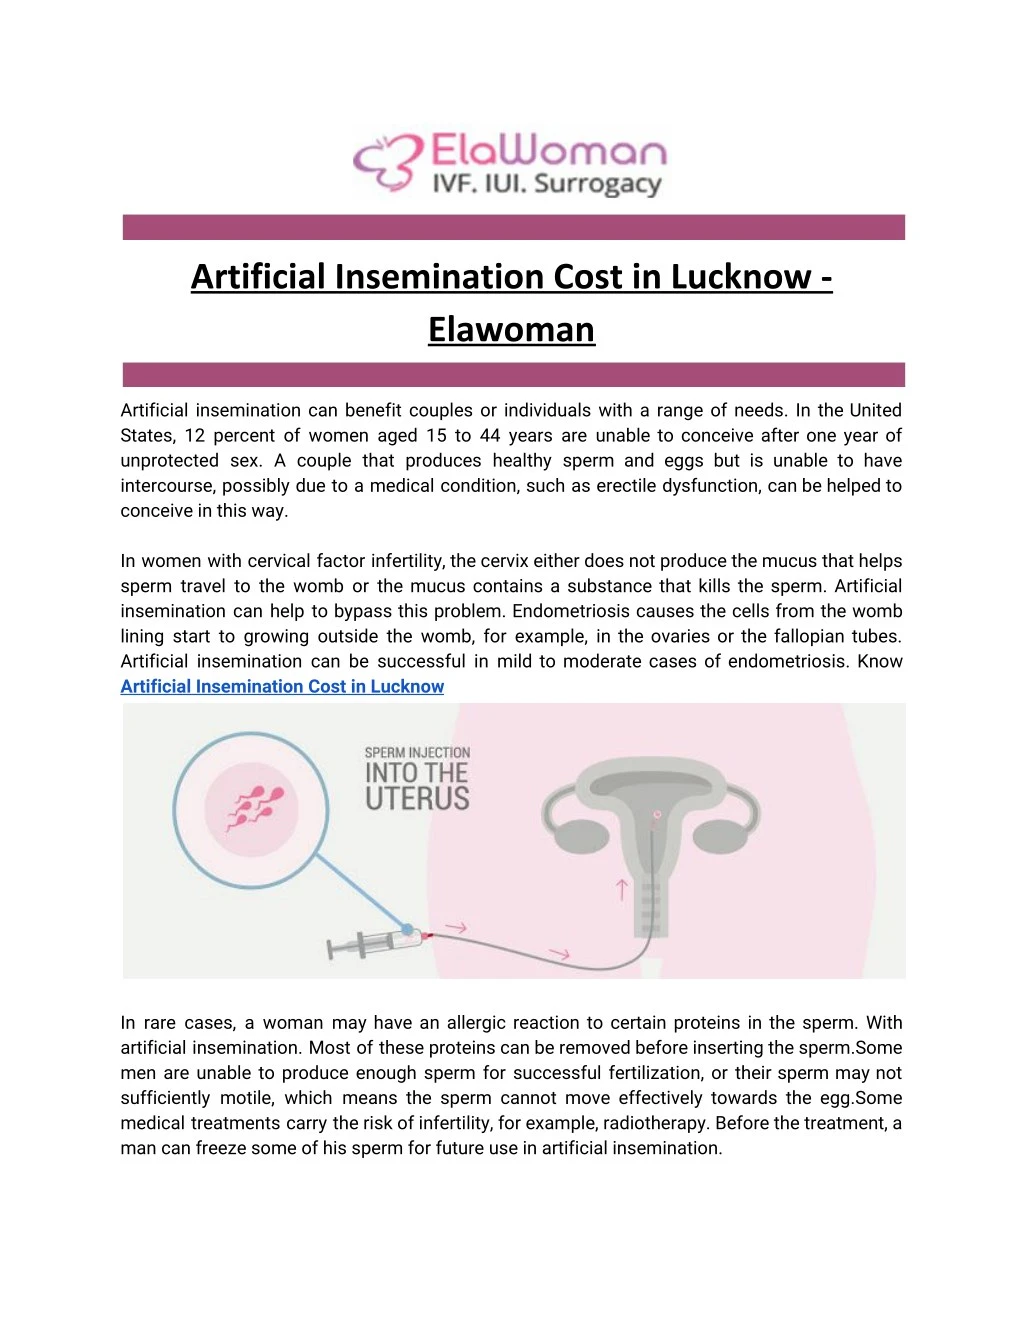 artificial insemination cost in lucknow elawoman